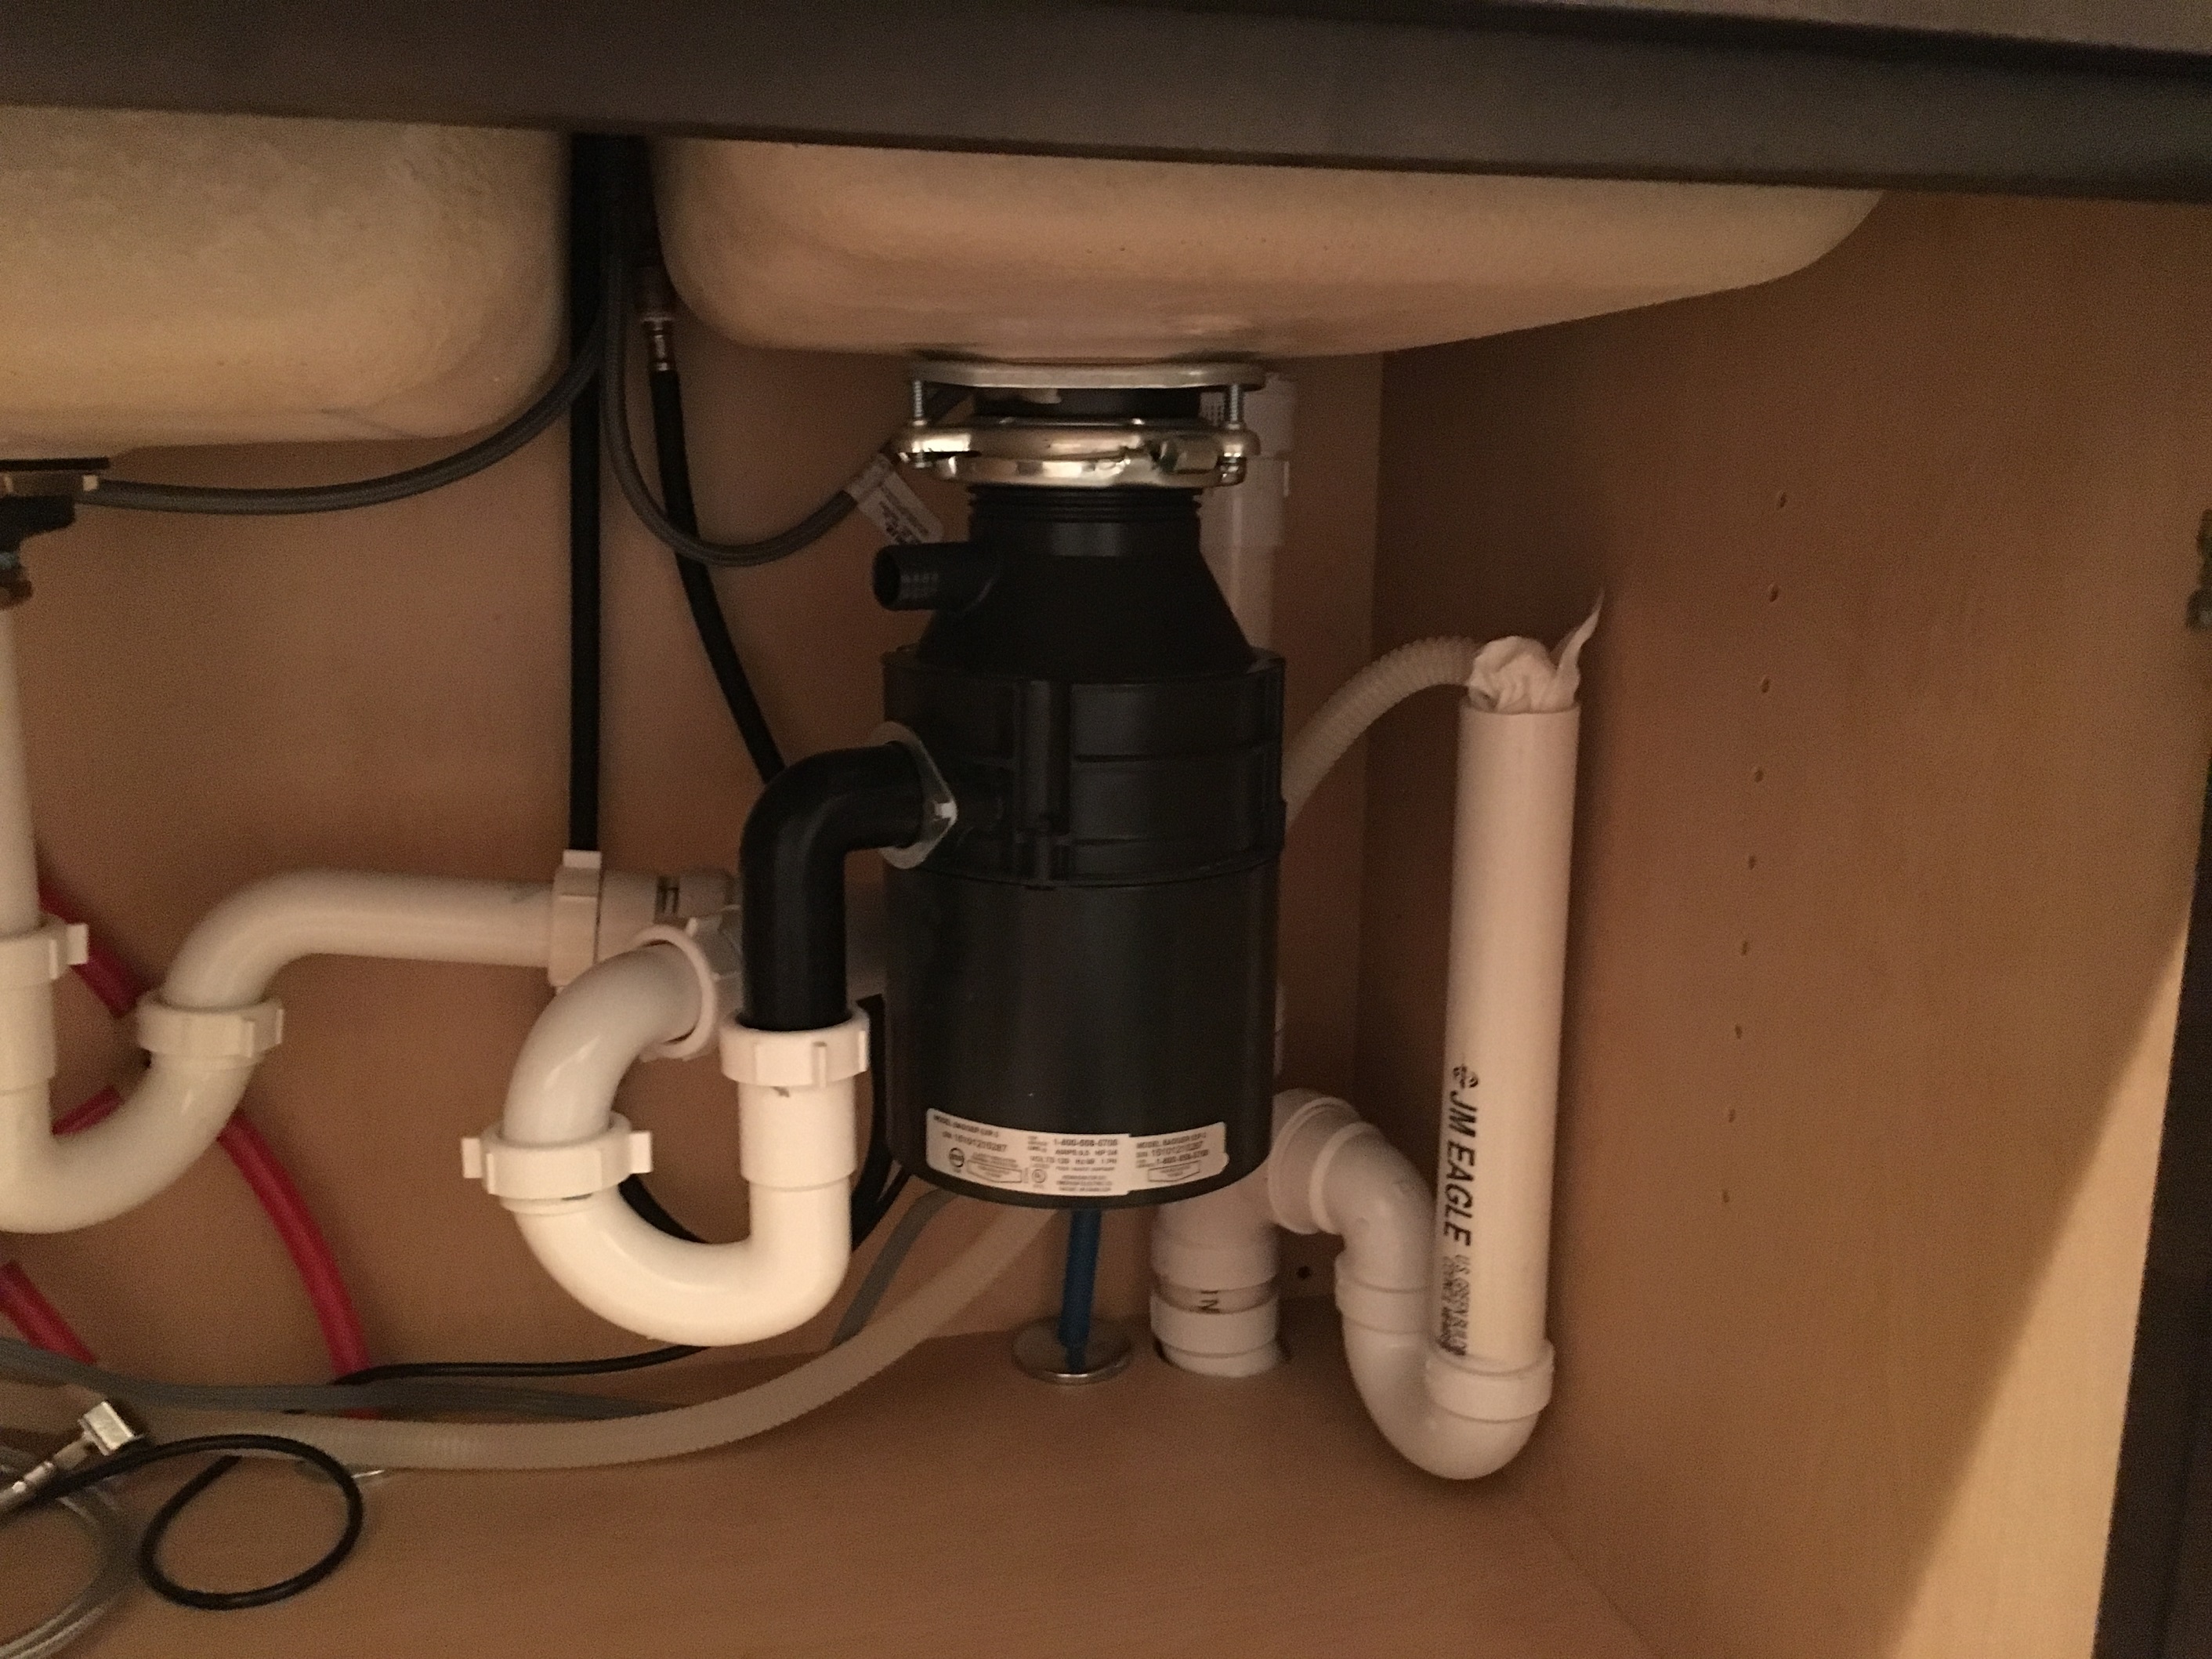 sewer gas smell in kitchen sink